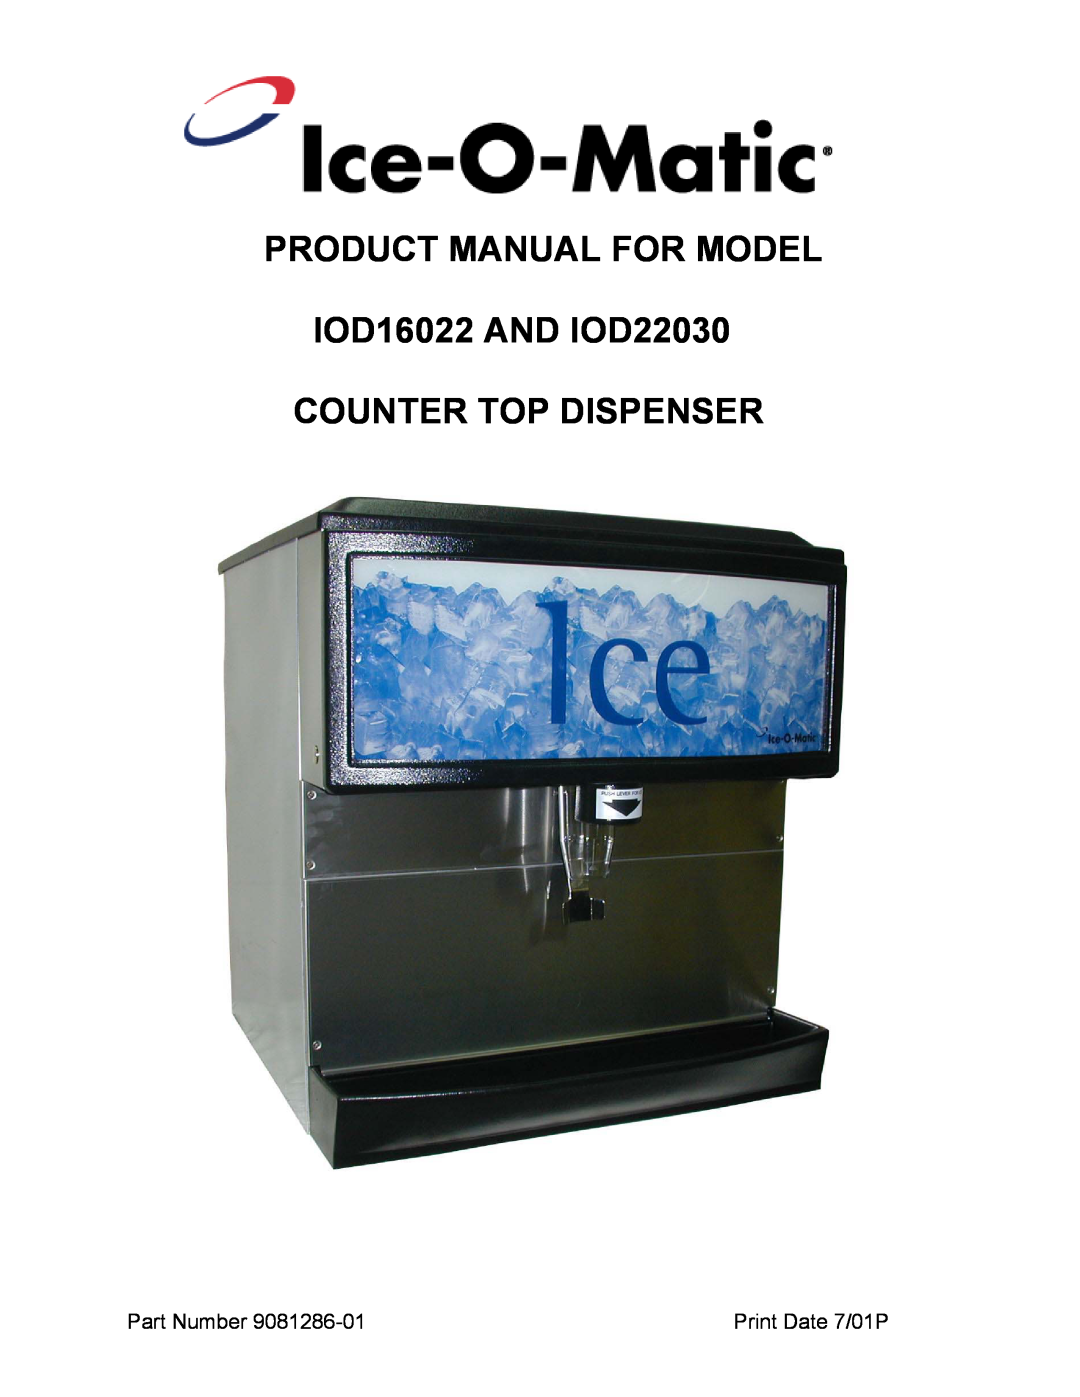 Ice-O-Matic manual Product Manual For Model, IOD16022 AND IOD22030 COUNTER TOP DISPENSER, Part Number, Print Date 7/01P 